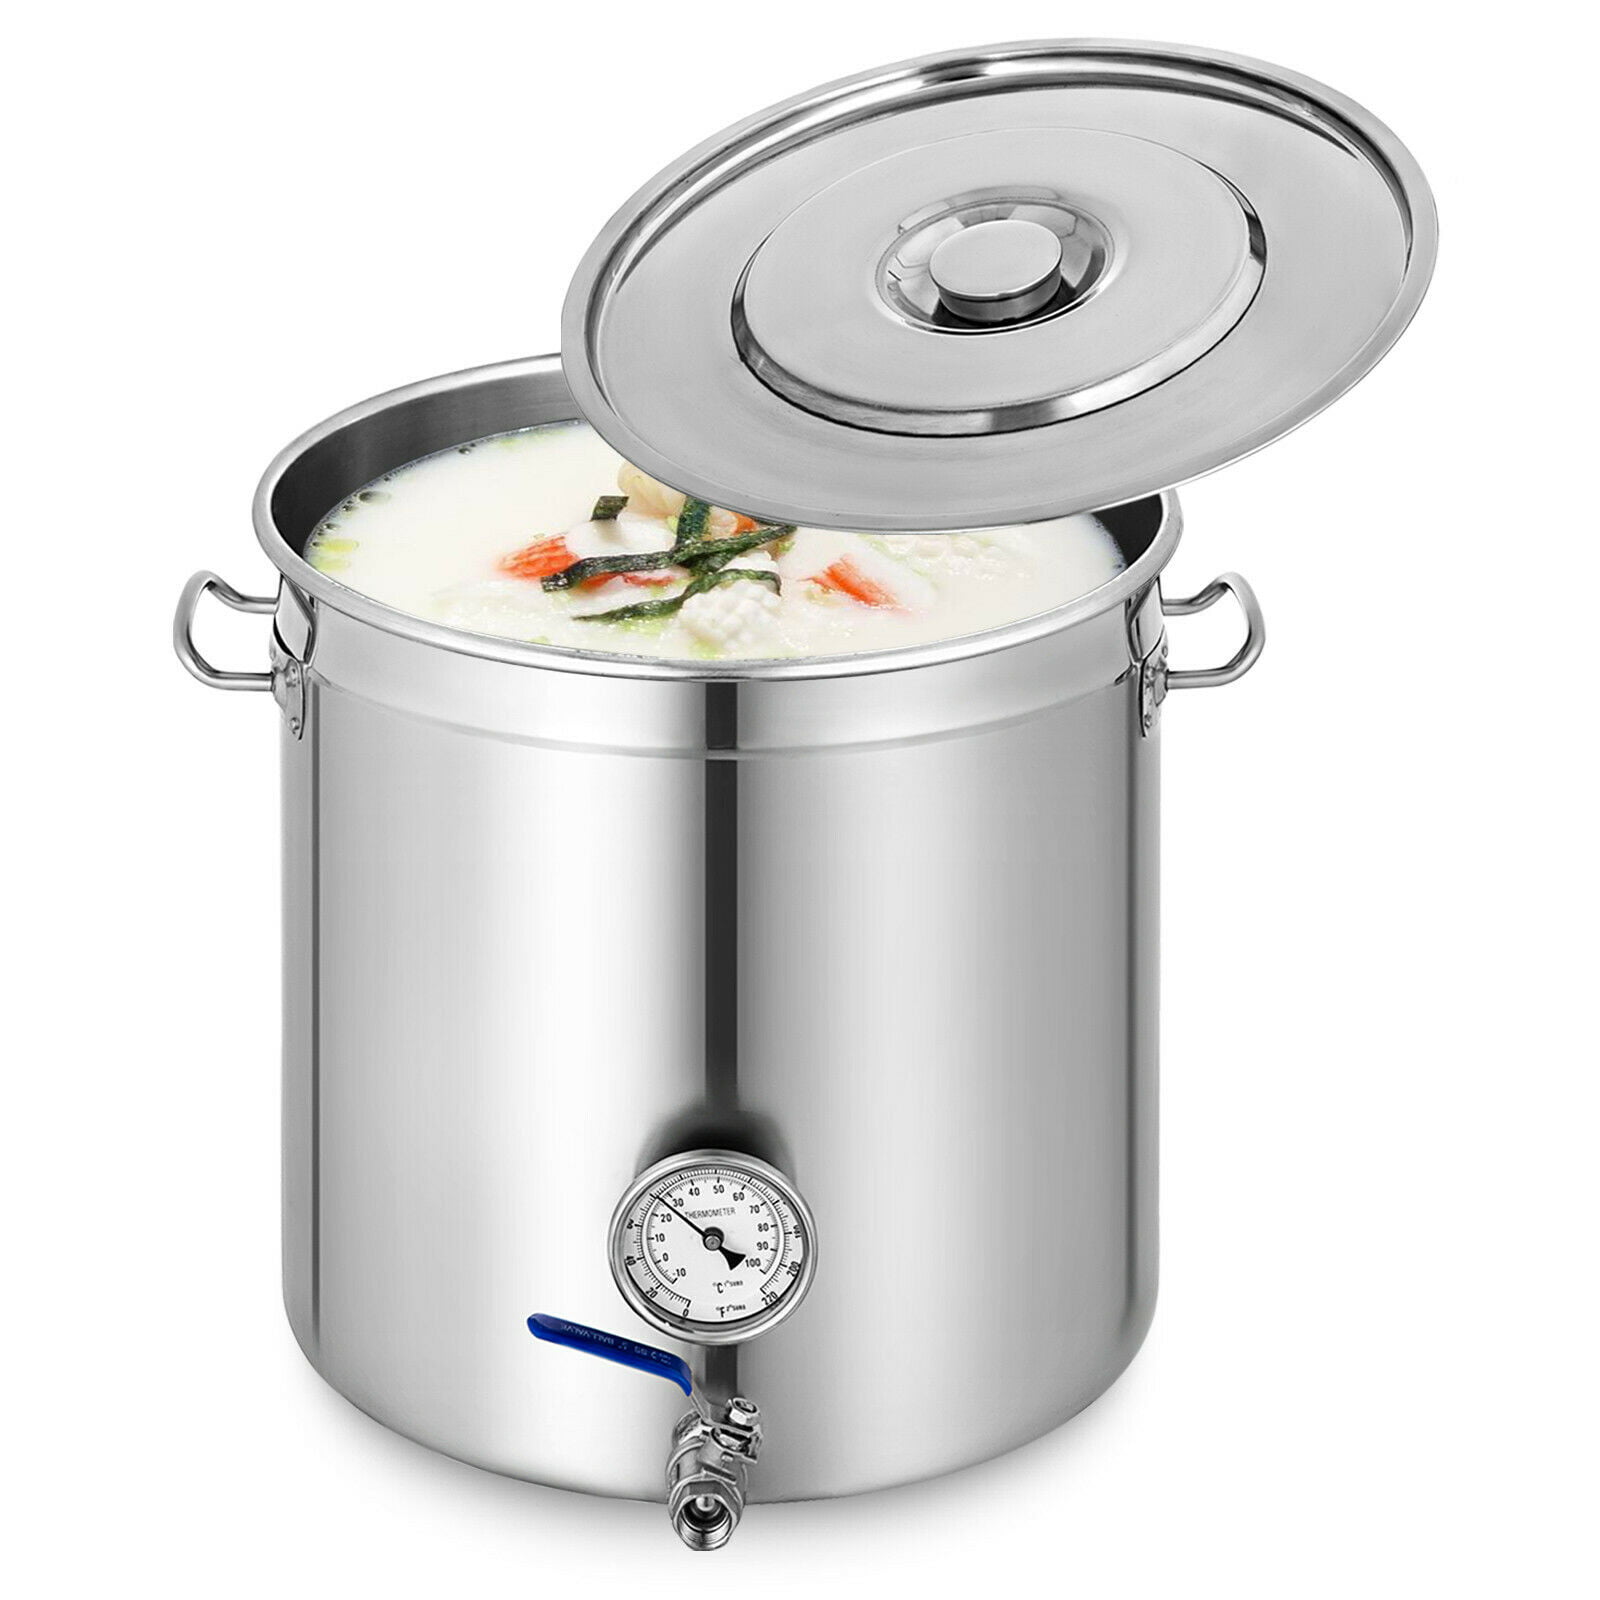 NEW 100 QT Quart Polished Stainless Steel Stock Pot Brewing Kettle Large w/ Lid 